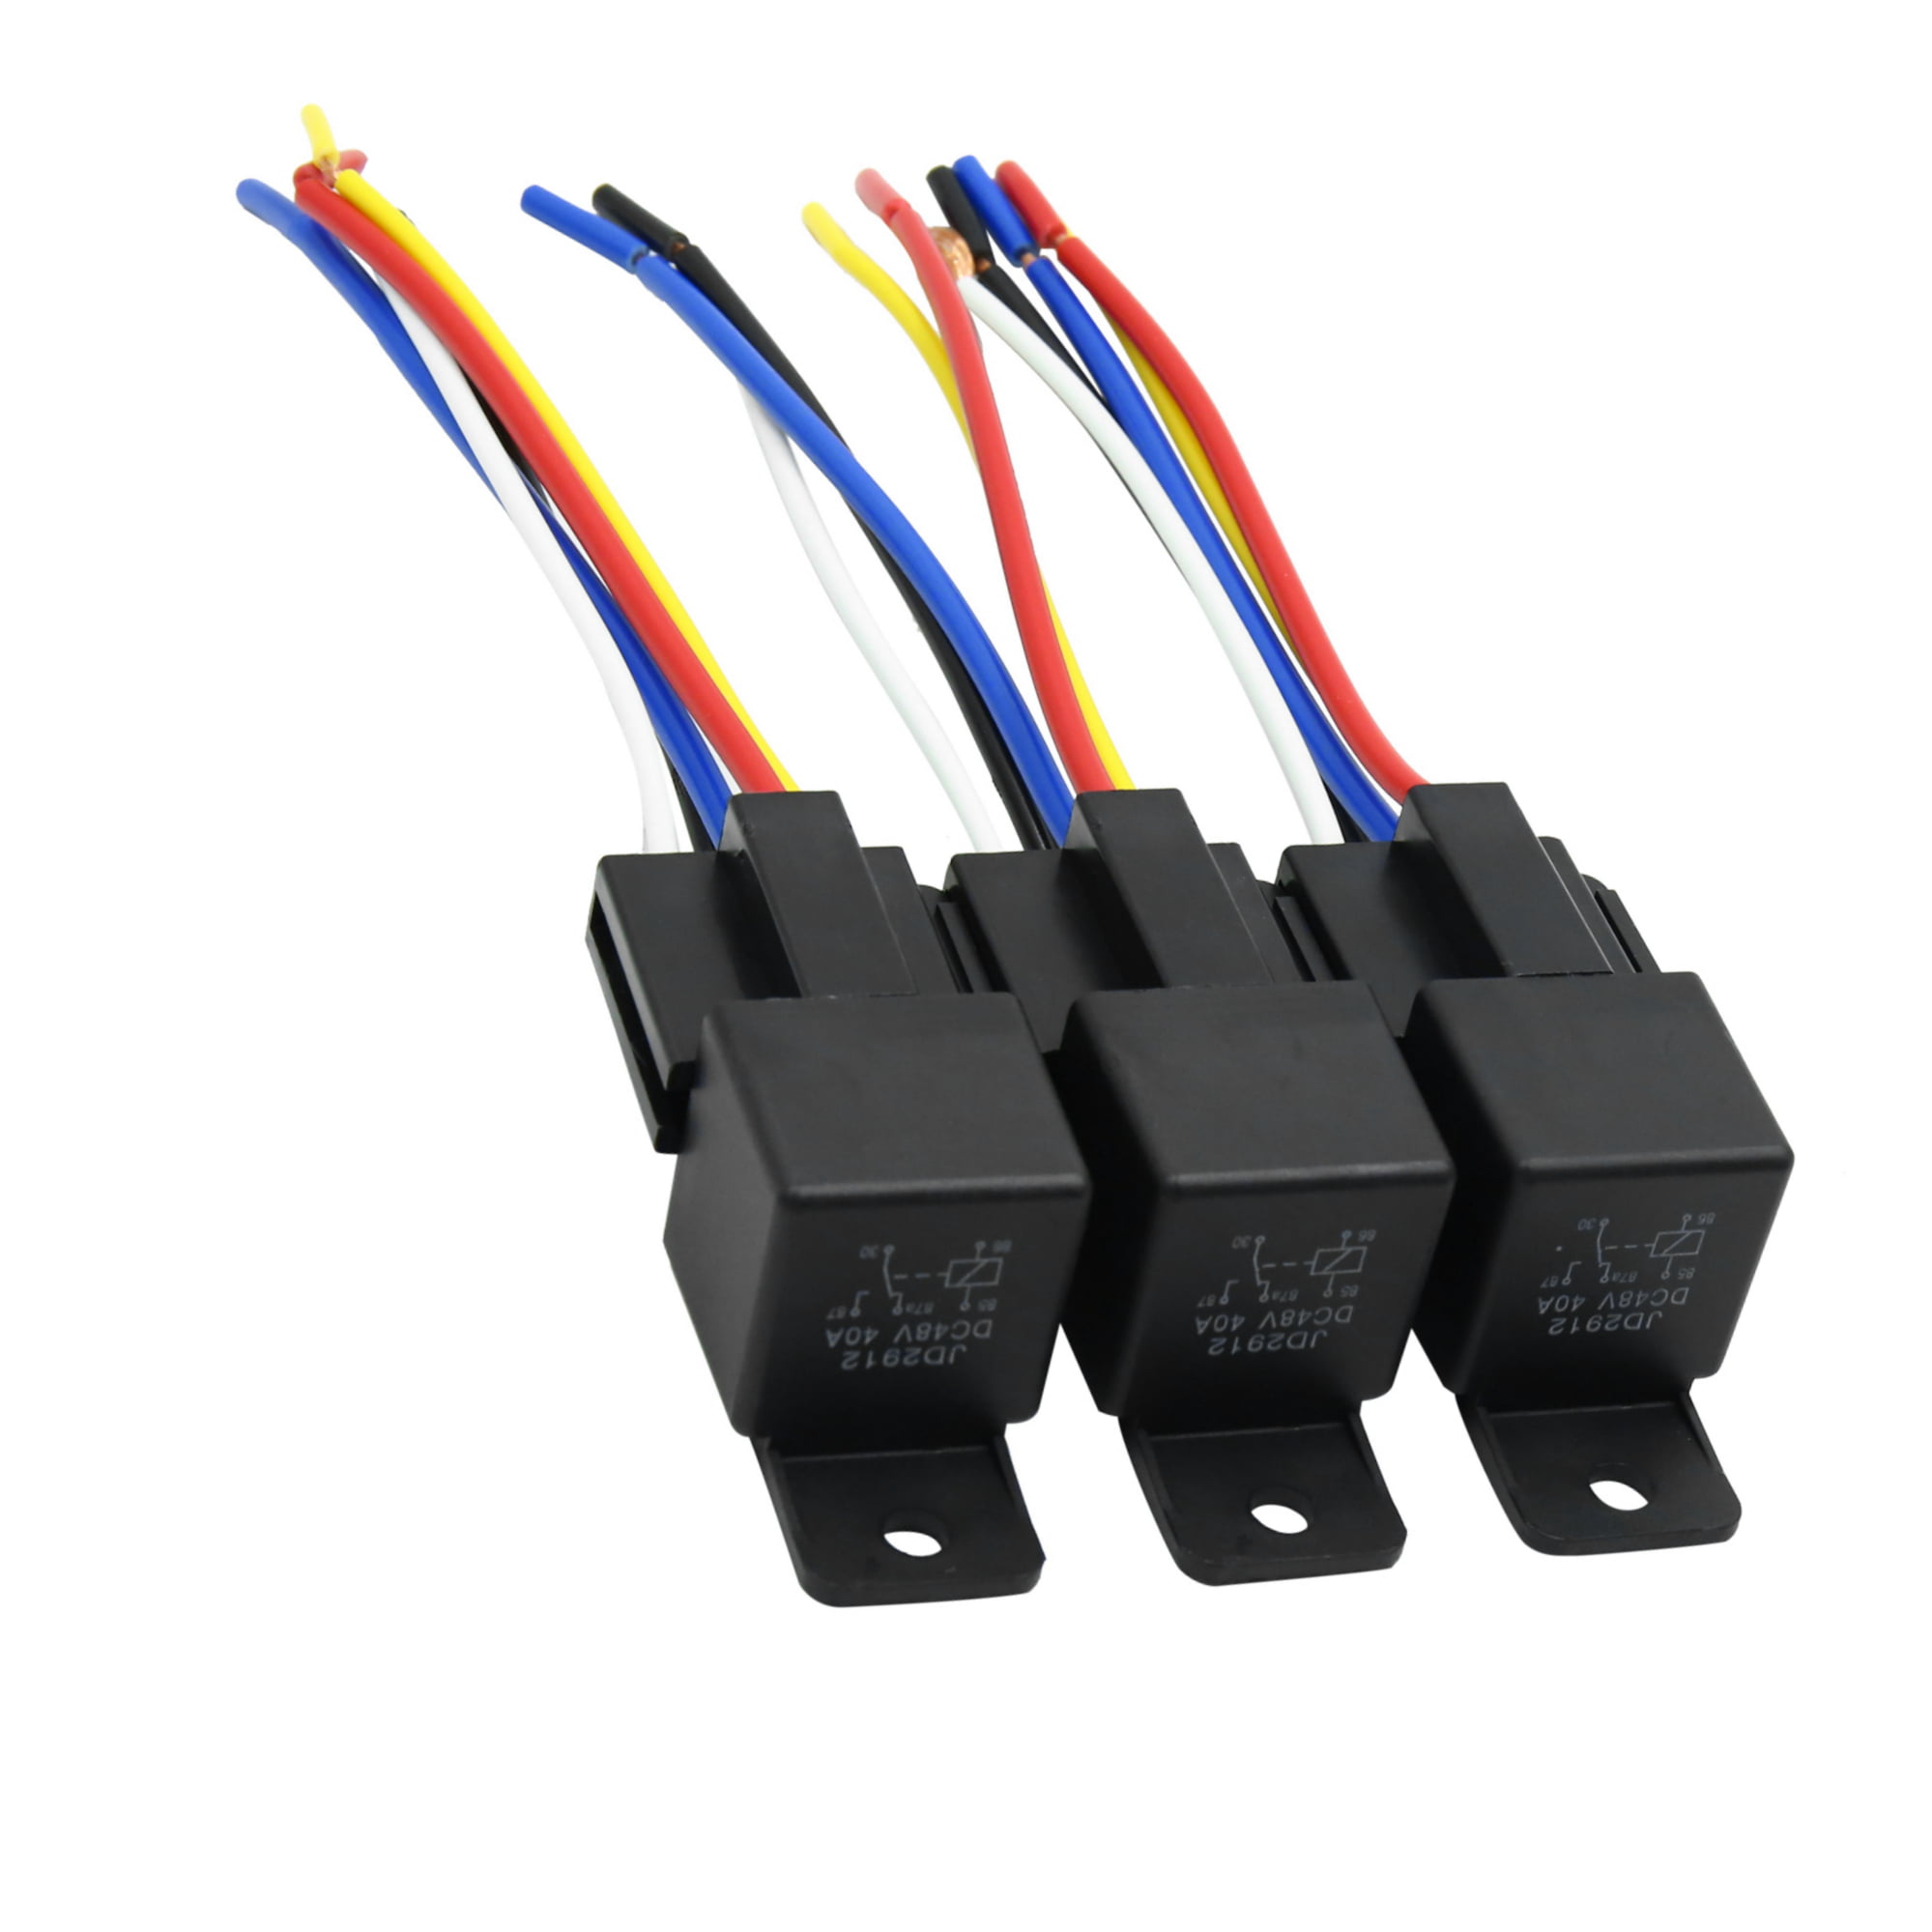 Unique Bargains DC 48V 40A SPDT Car Relay 5 Pin 5 Wires w/ Harness Socket Universal 3pcs, Size: 2.05 inchx1.10 inchx1.26 inch(Large*W*H)